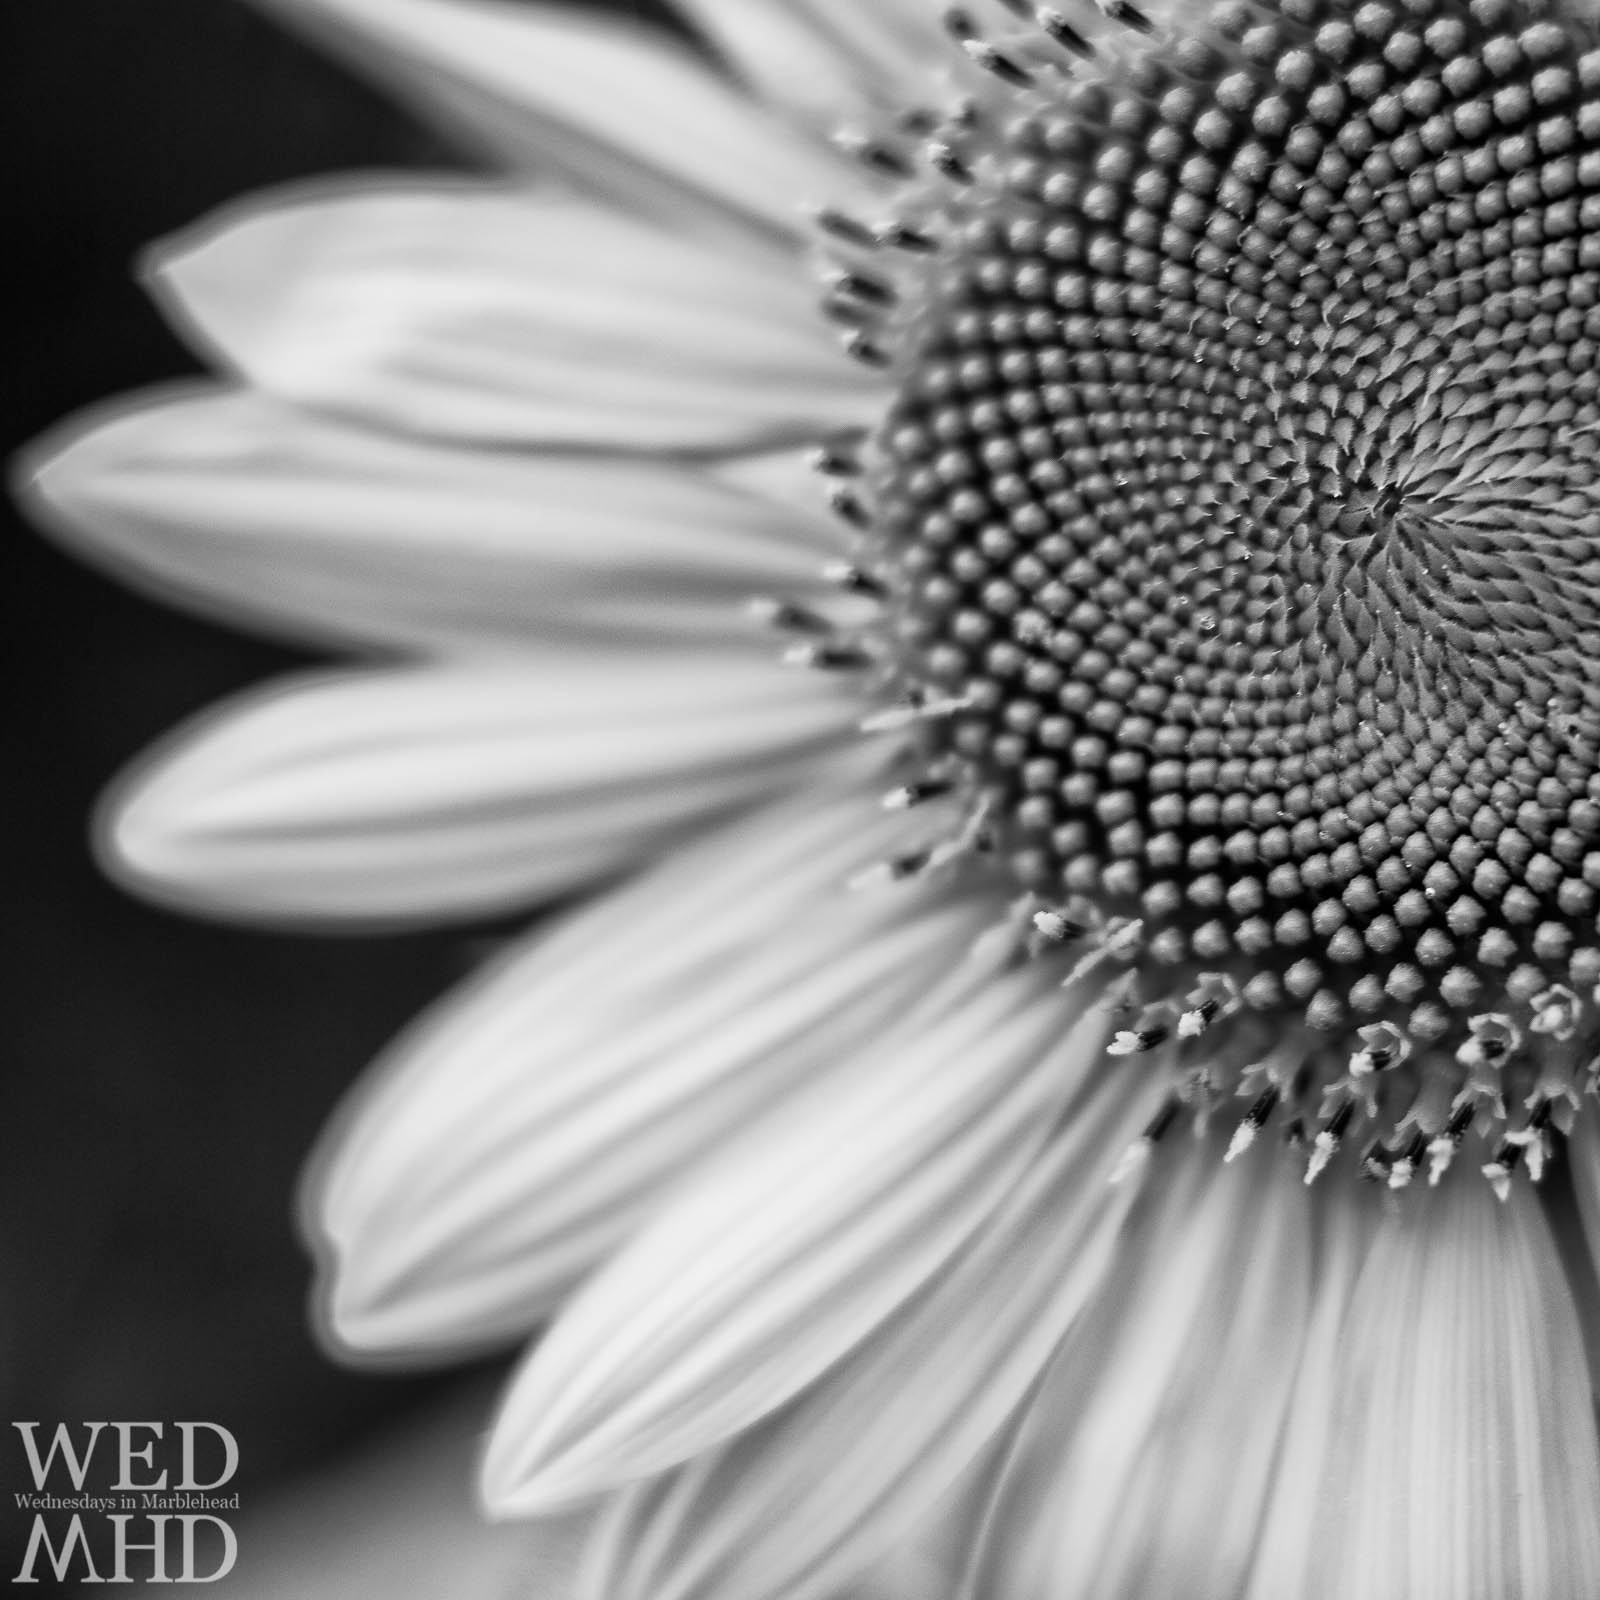 Sunflowers in Black and White - Marblehead, MA